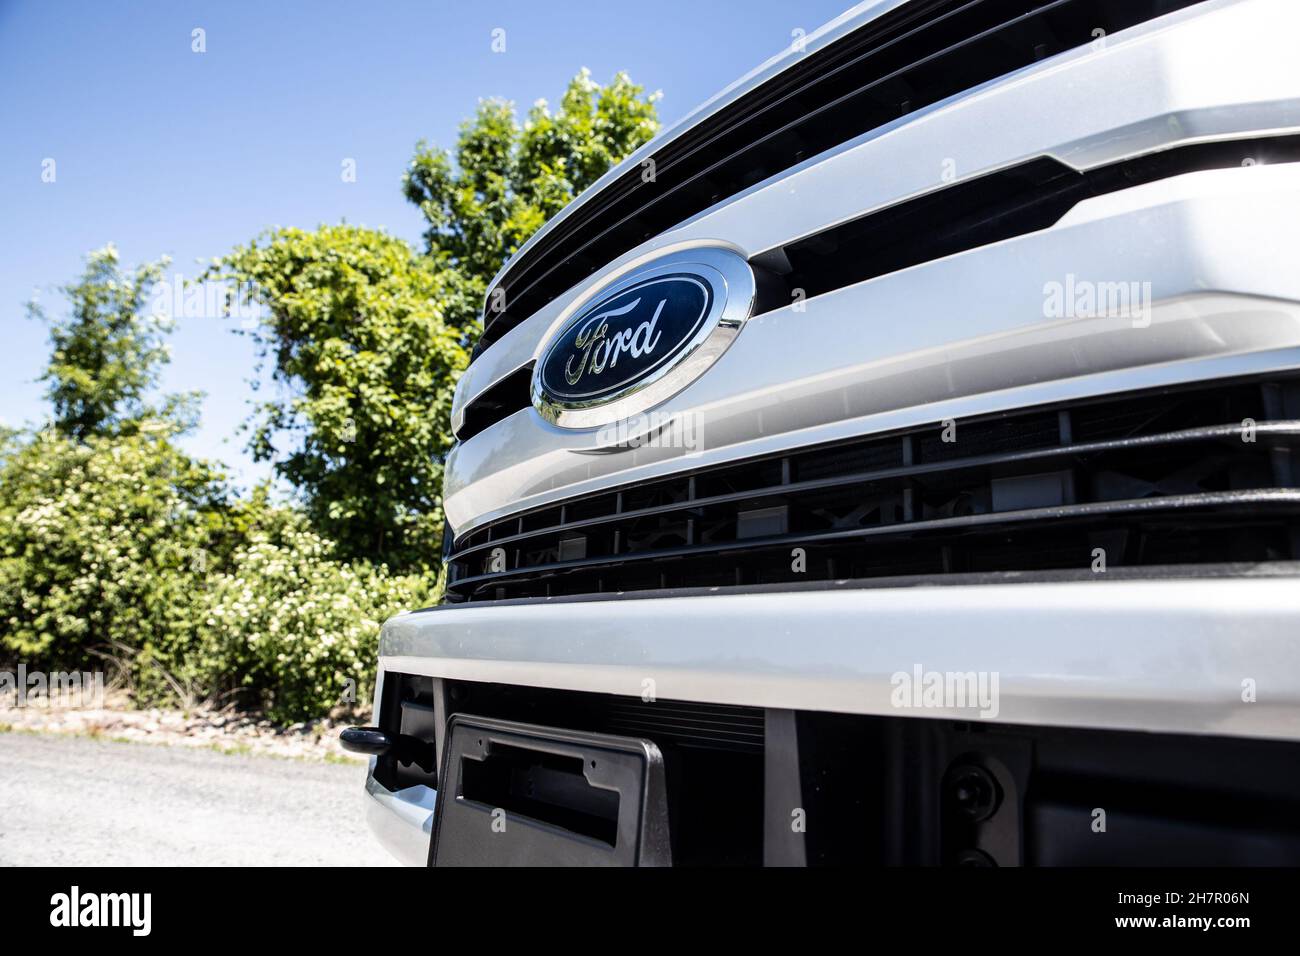 OSWEGO, UNITED STATES - Jul 05, 2020: A white lifted Ford truck near green trees Stock Photo